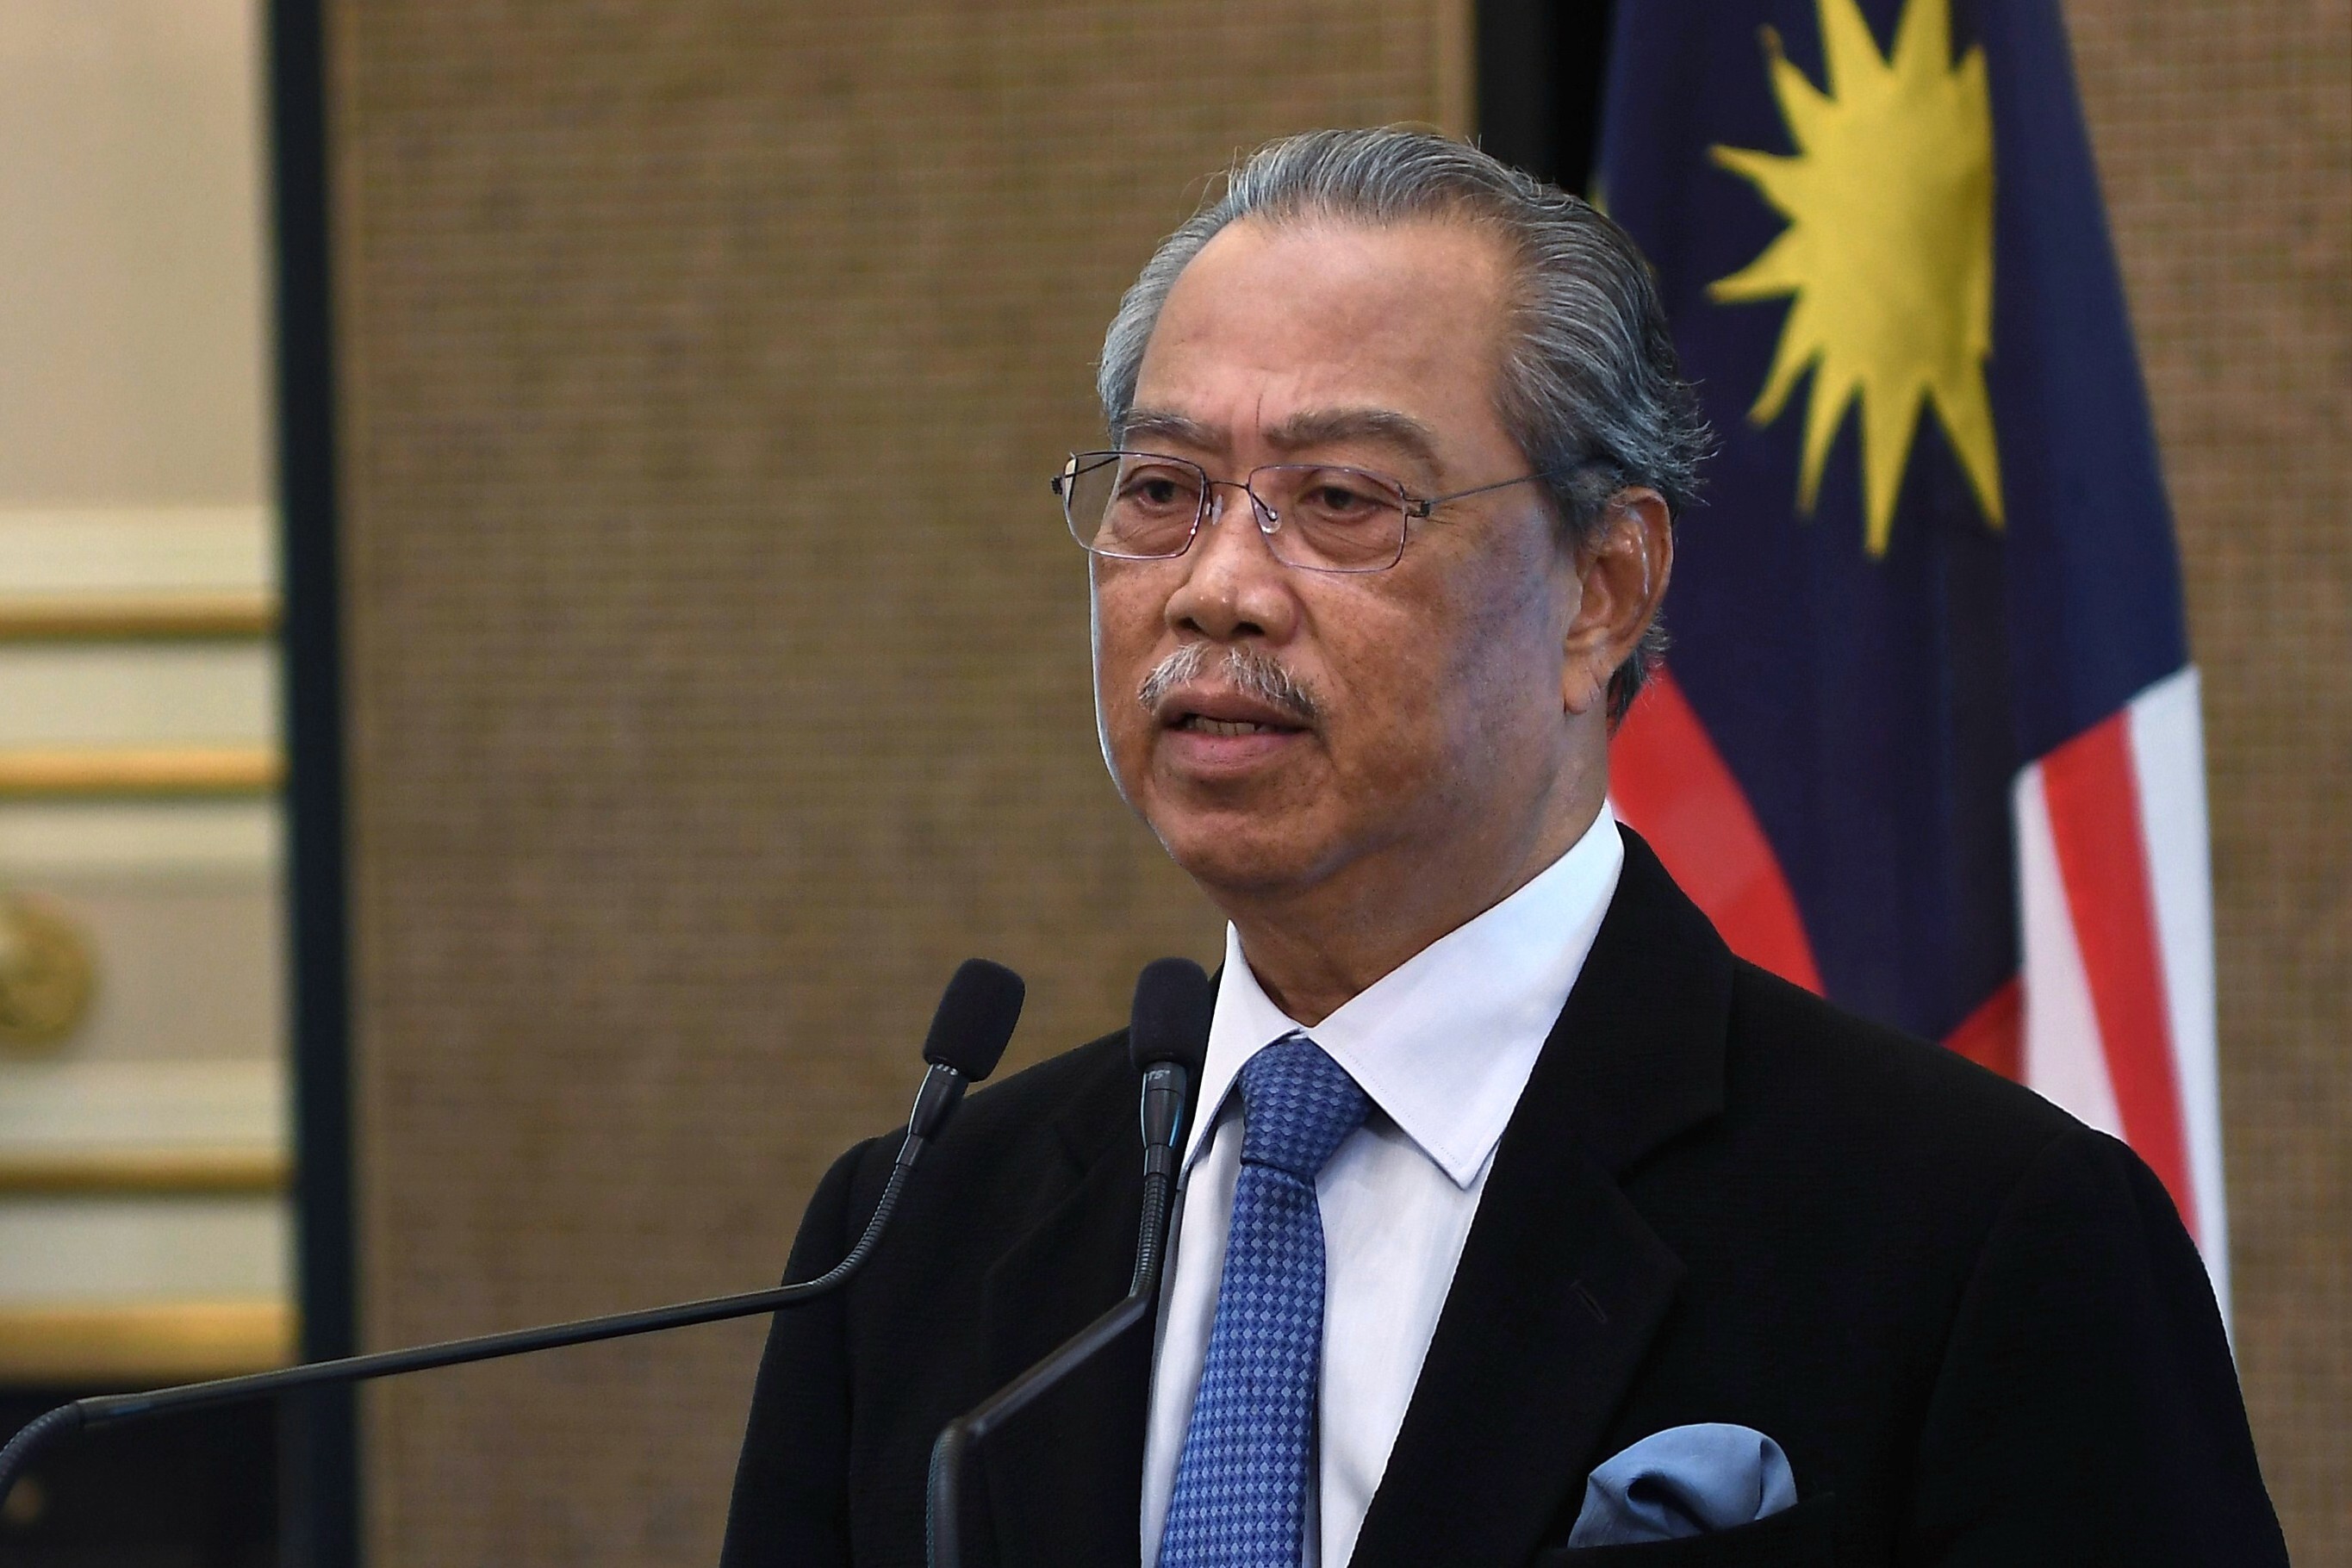 “That [Prime Minister] Muhyiddin [Yassin] has been able to secure the chief minister position in Sabah for Bersatu strengthens his clout,” one analyst said. Photo: Bernama